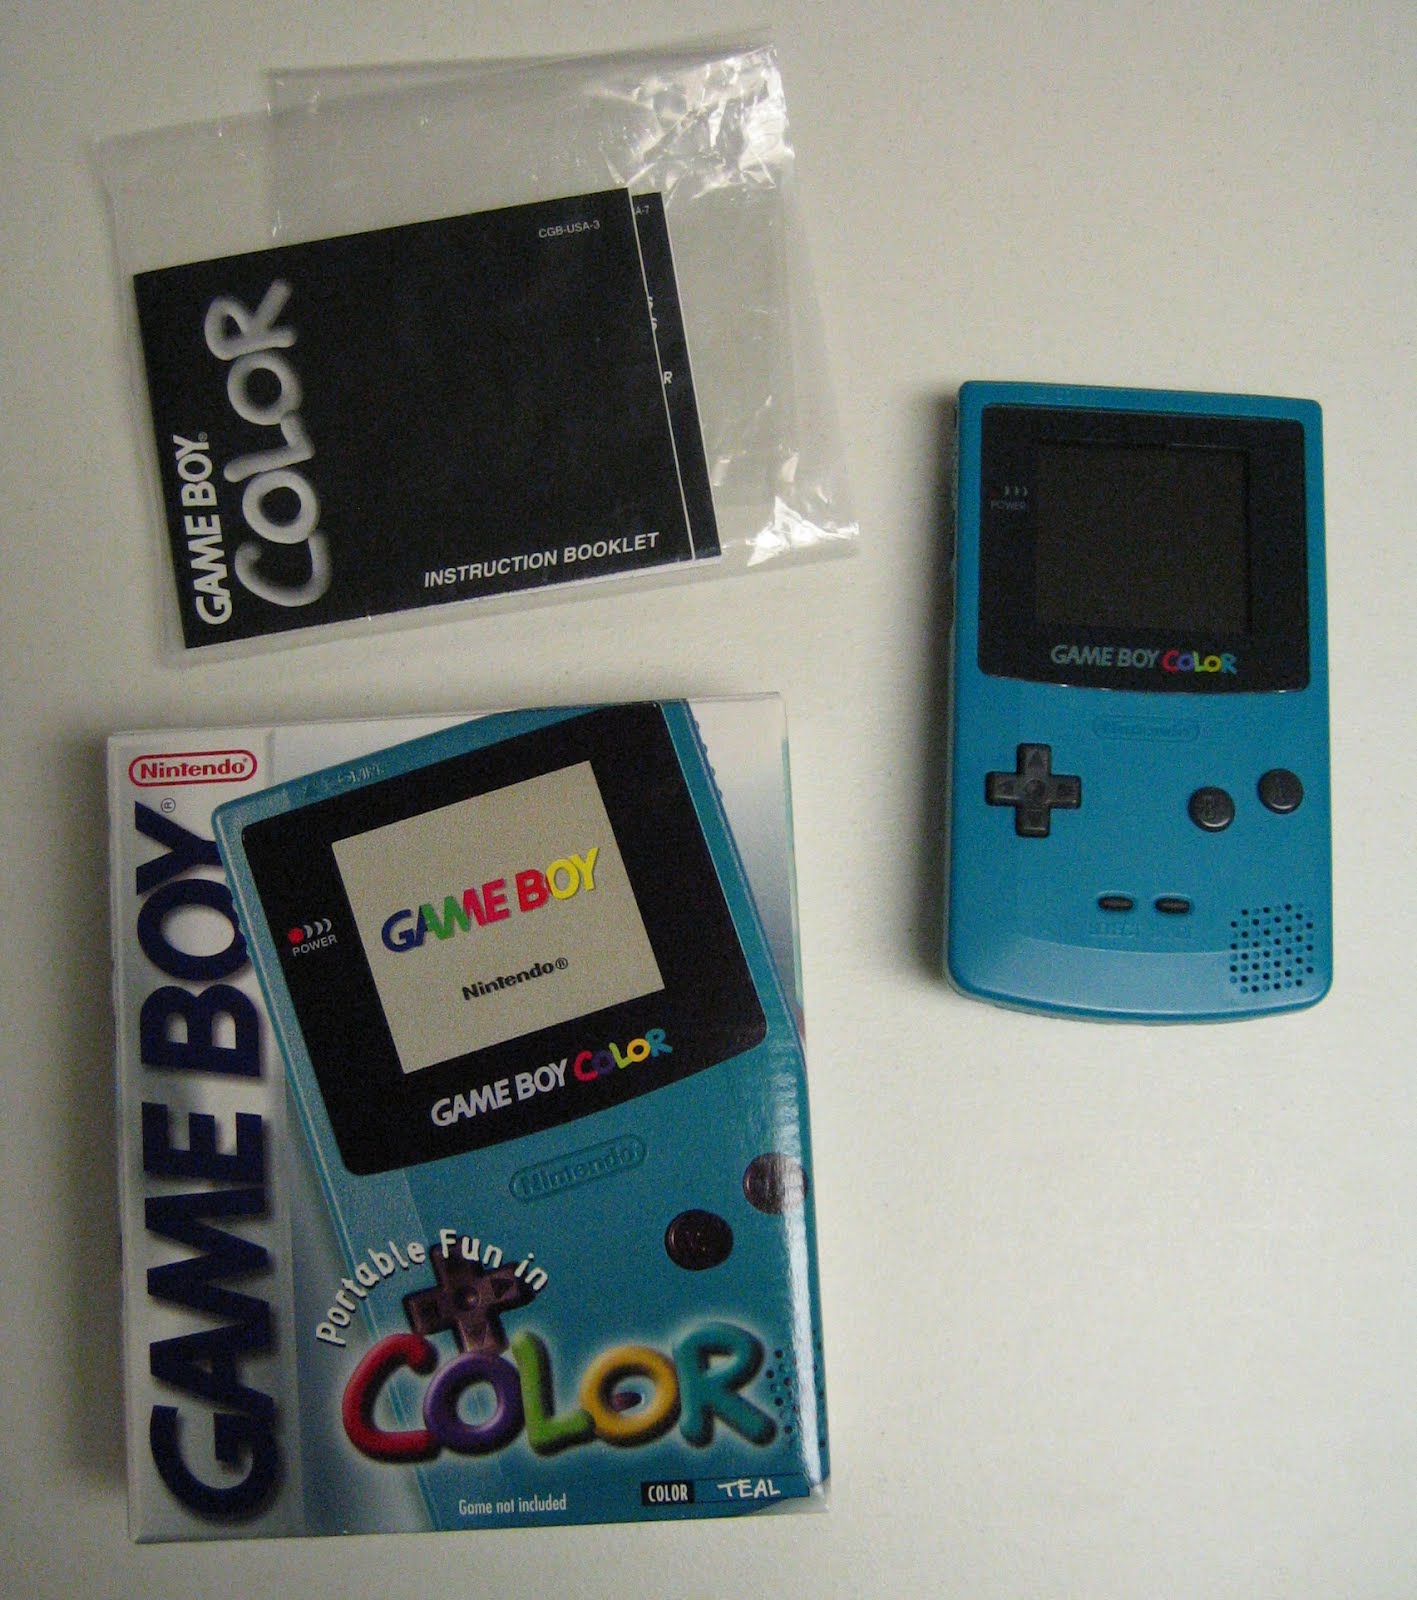 Gameboy Color Teal Imgkid Com The Image Kid Has It Coloring Wallpapers Download Free Images Wallpaper [coloring365.blogspot.com]